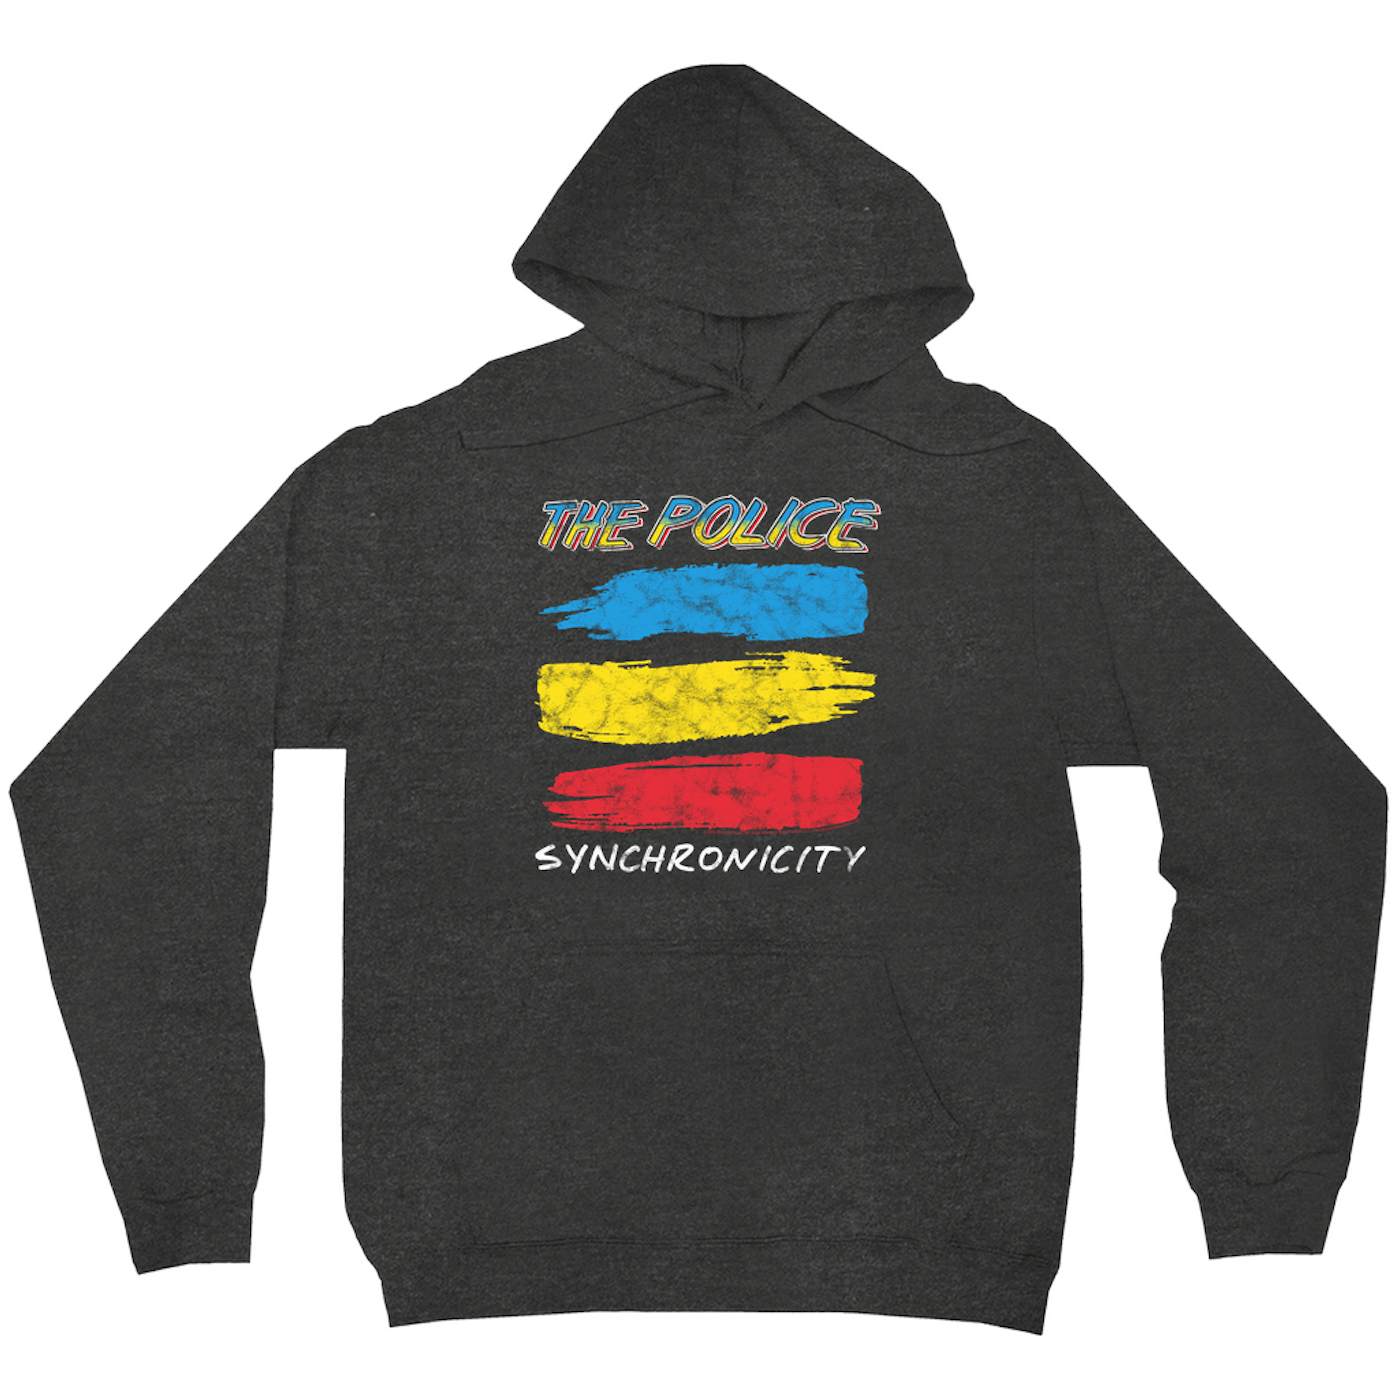 The Police Hoodie | Synchronicity Album Image Remix Distressed (Merchbar Exclusive) The Police Hoodie